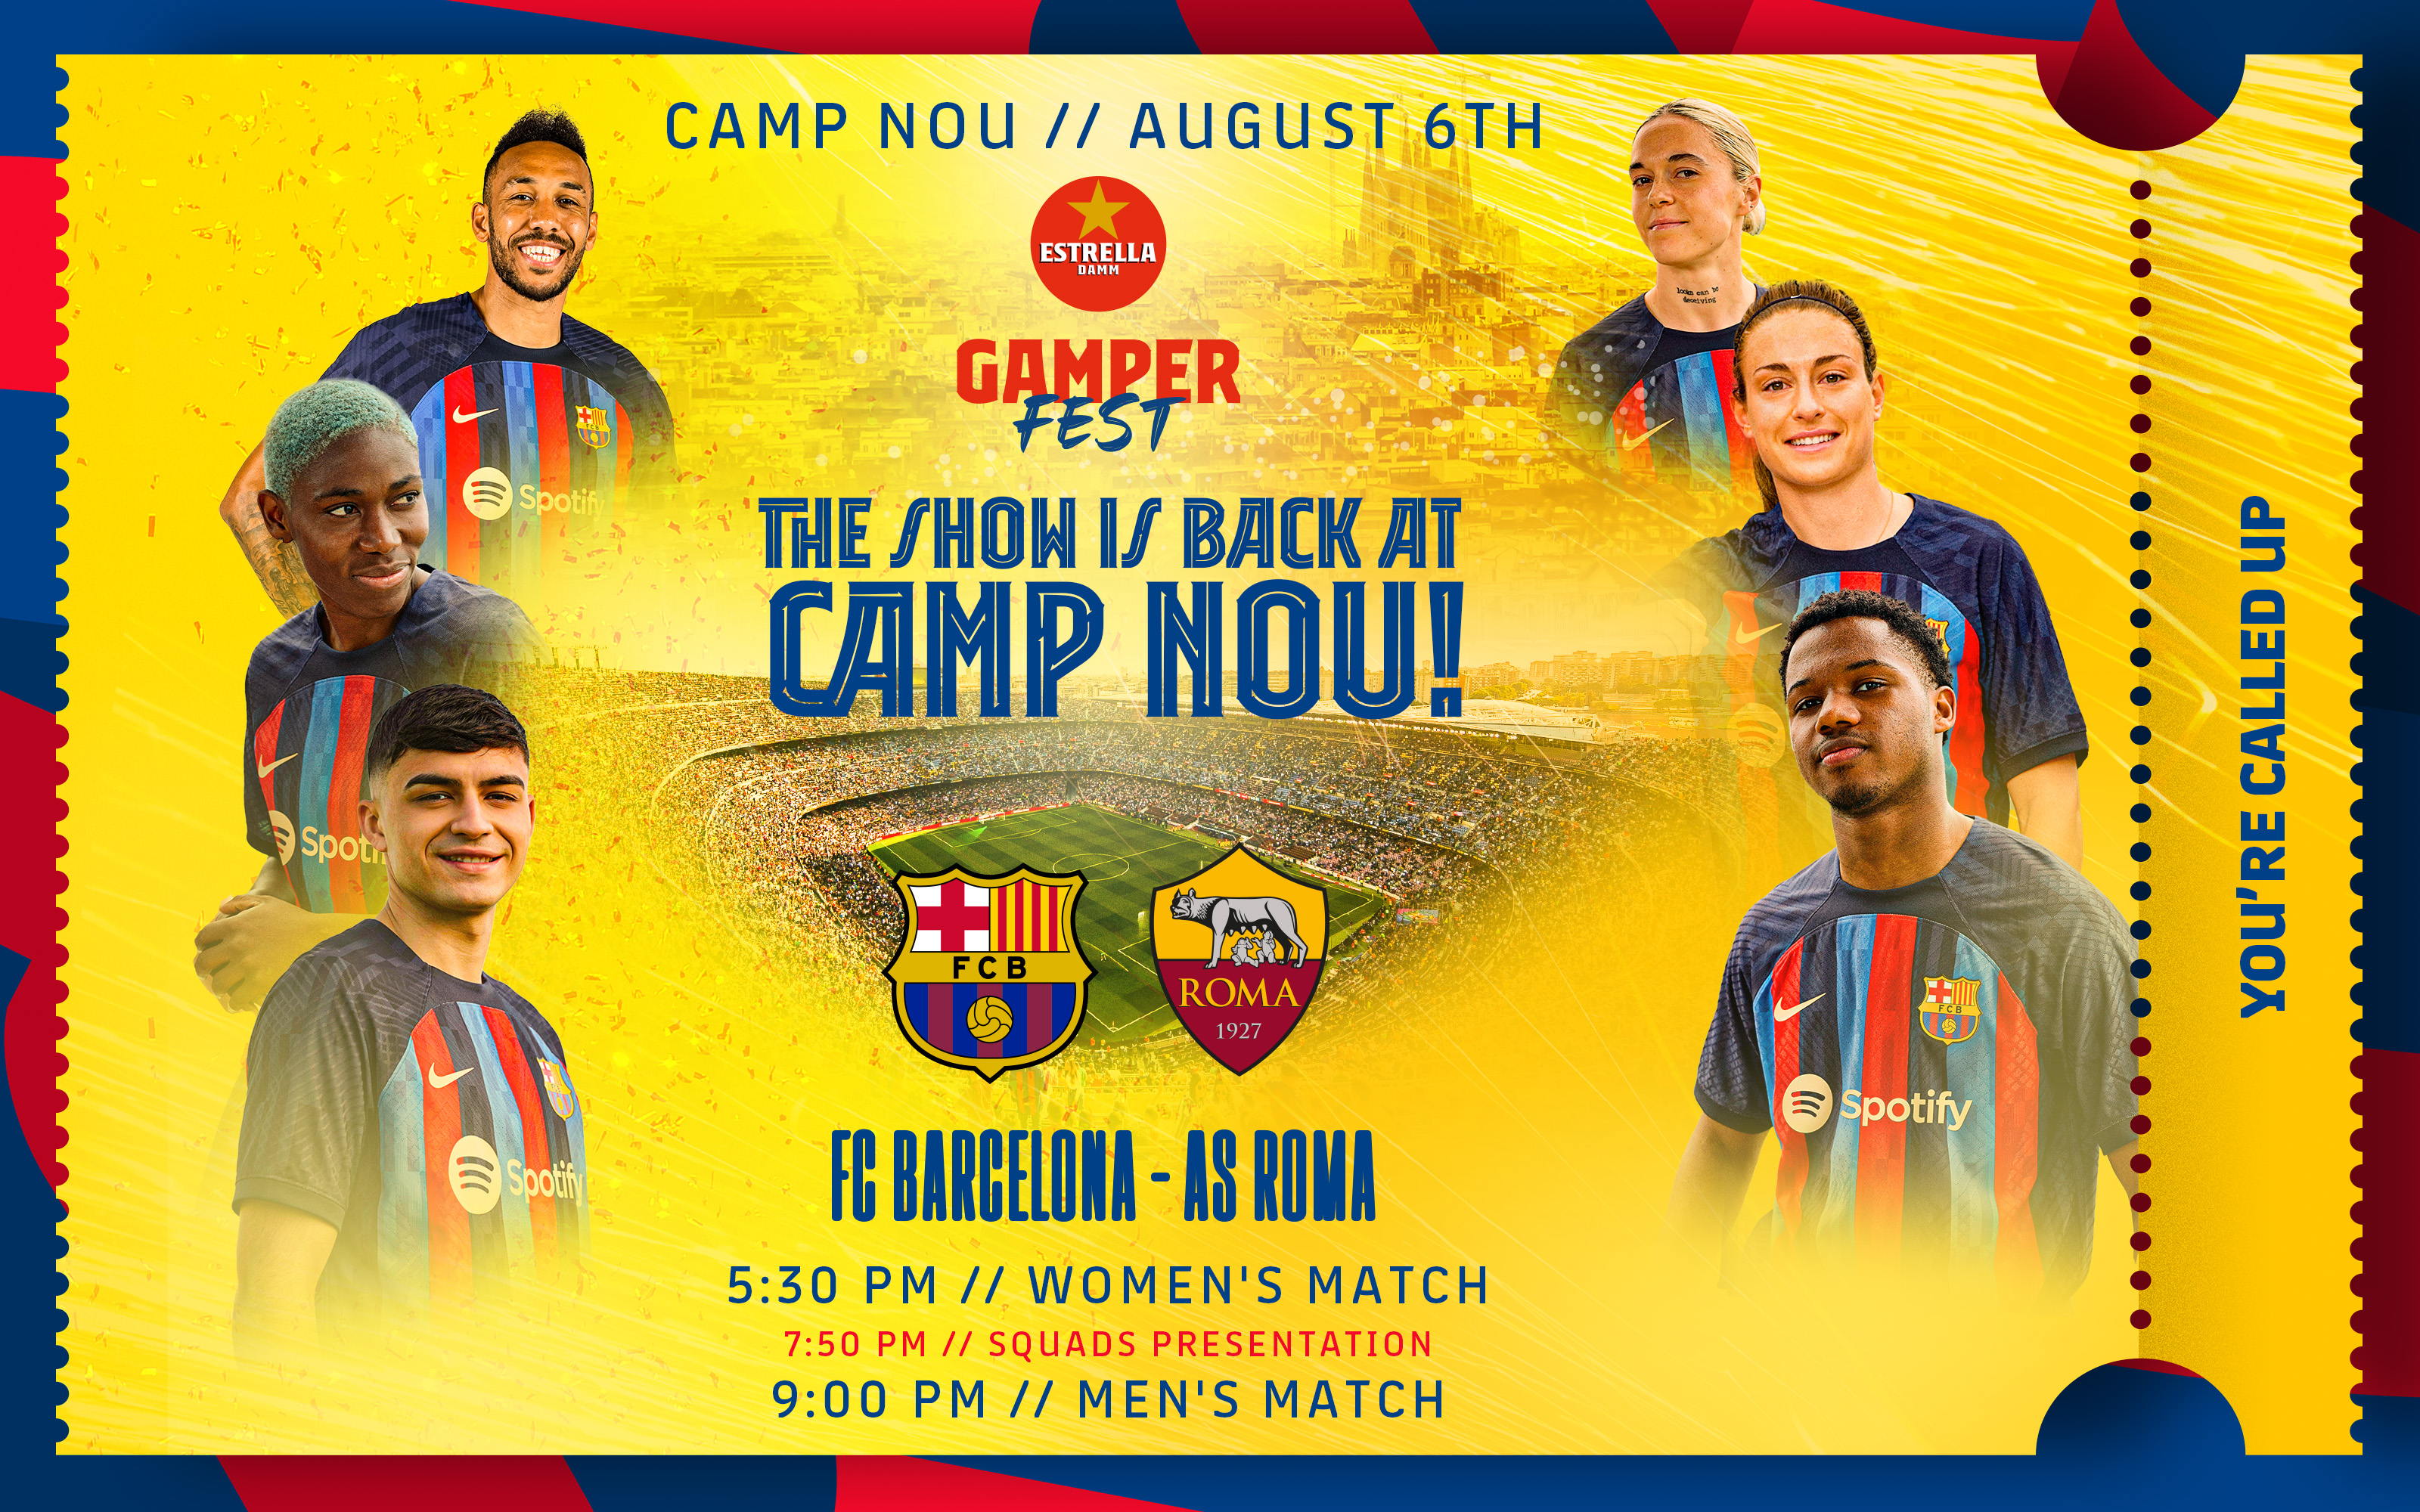 Barca To Face As Roma In Gamper On August 6